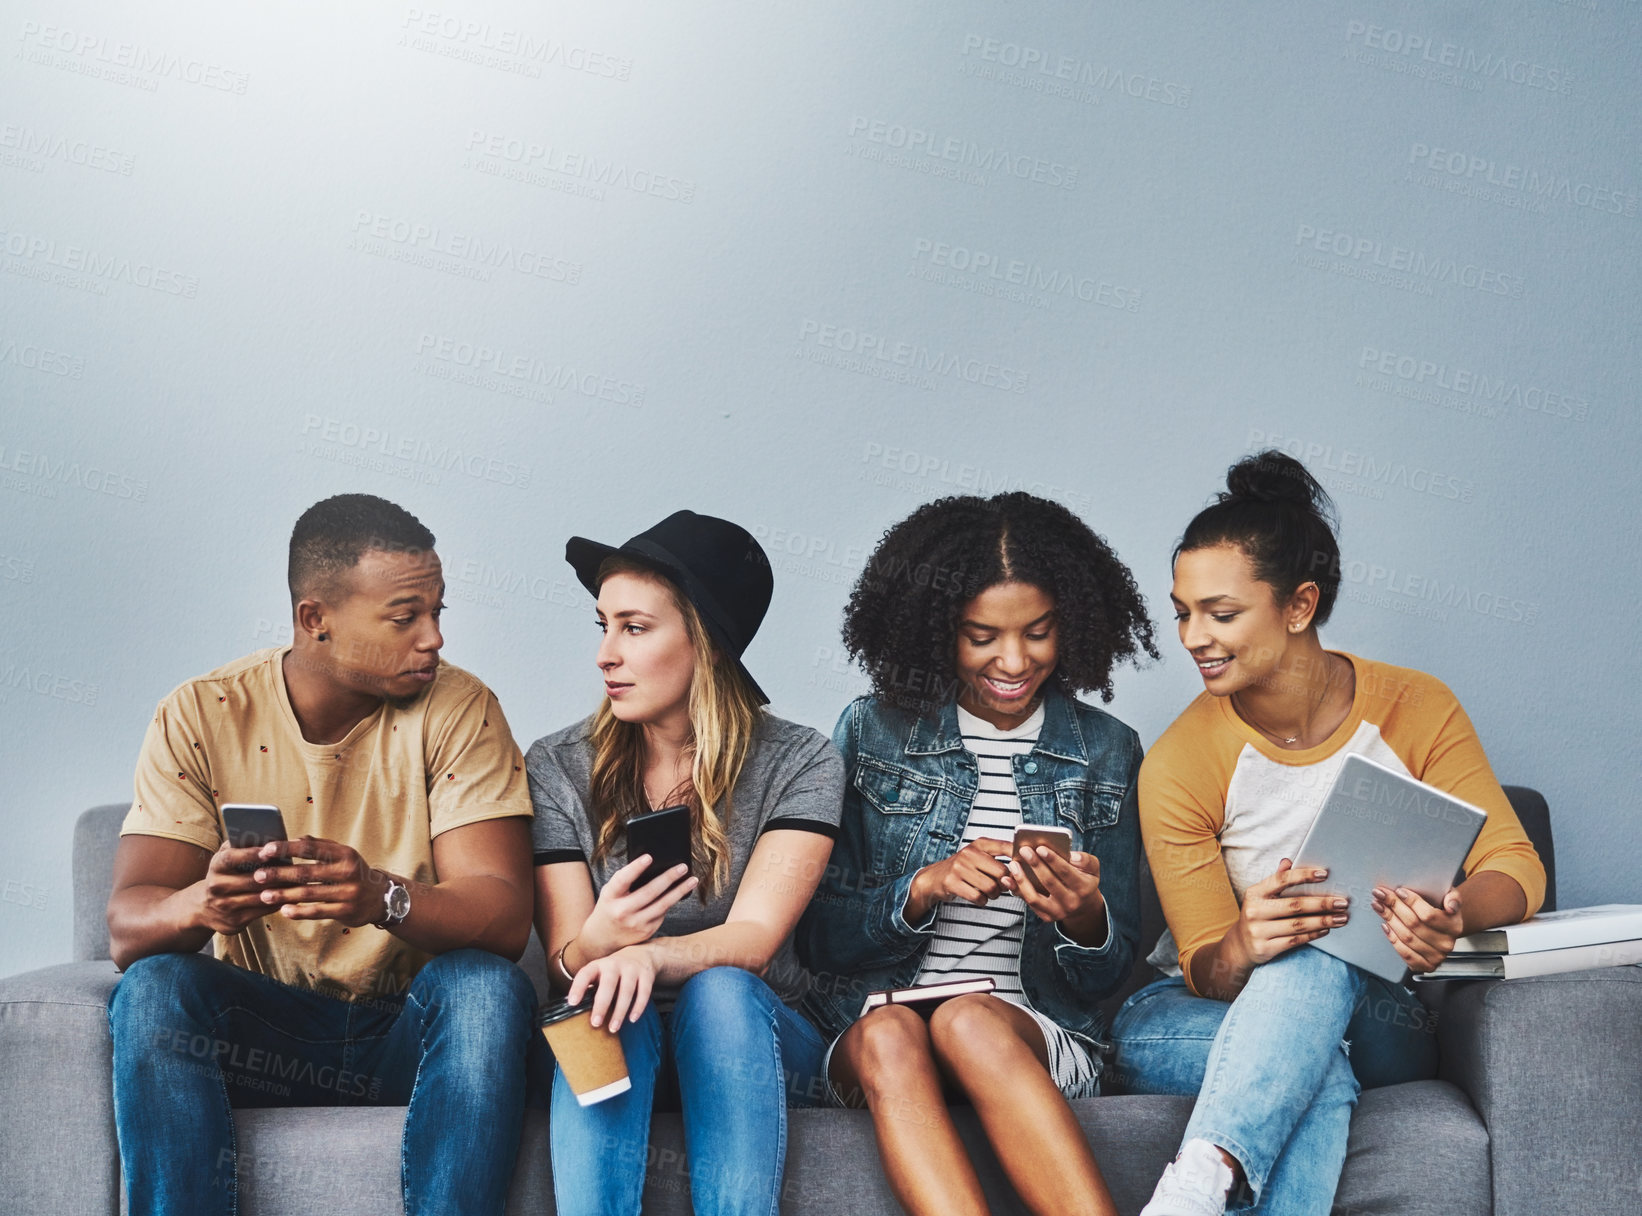 Buy stock photo Studio shot of young people sitting on a sofa and using wireless technology against a gray background